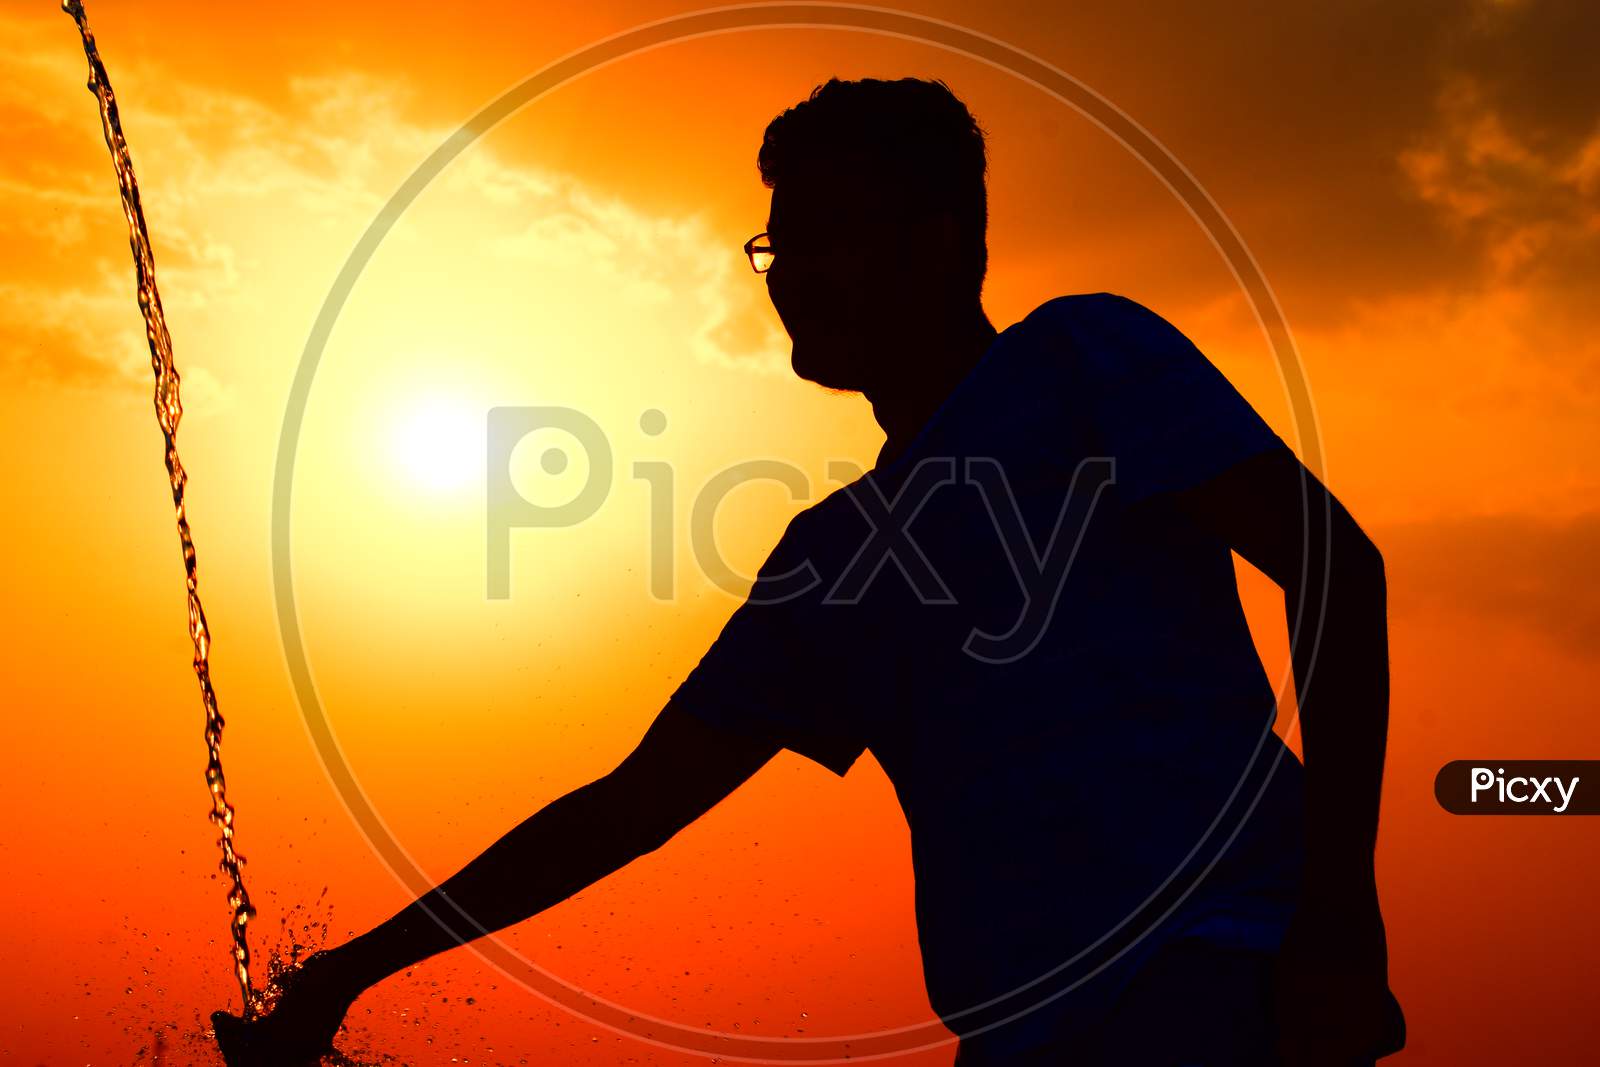 Silhouette Of man Playing With Water